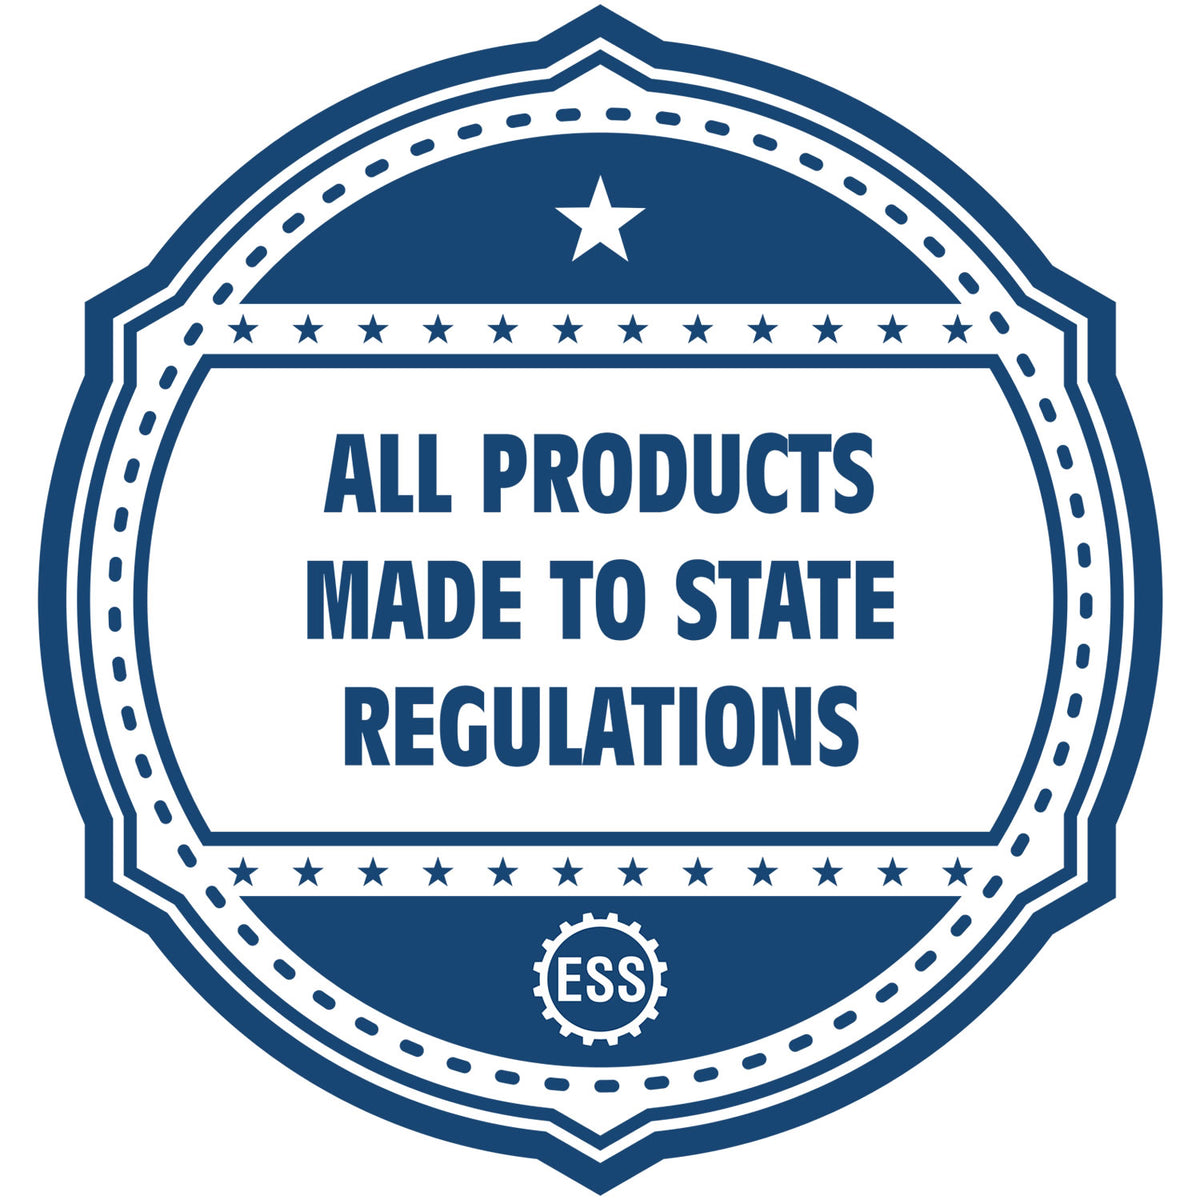 An icon or badge element for the State of Kansas Soft Land Surveyor Embossing Seal showing that this product is made in compliance with state regulations.